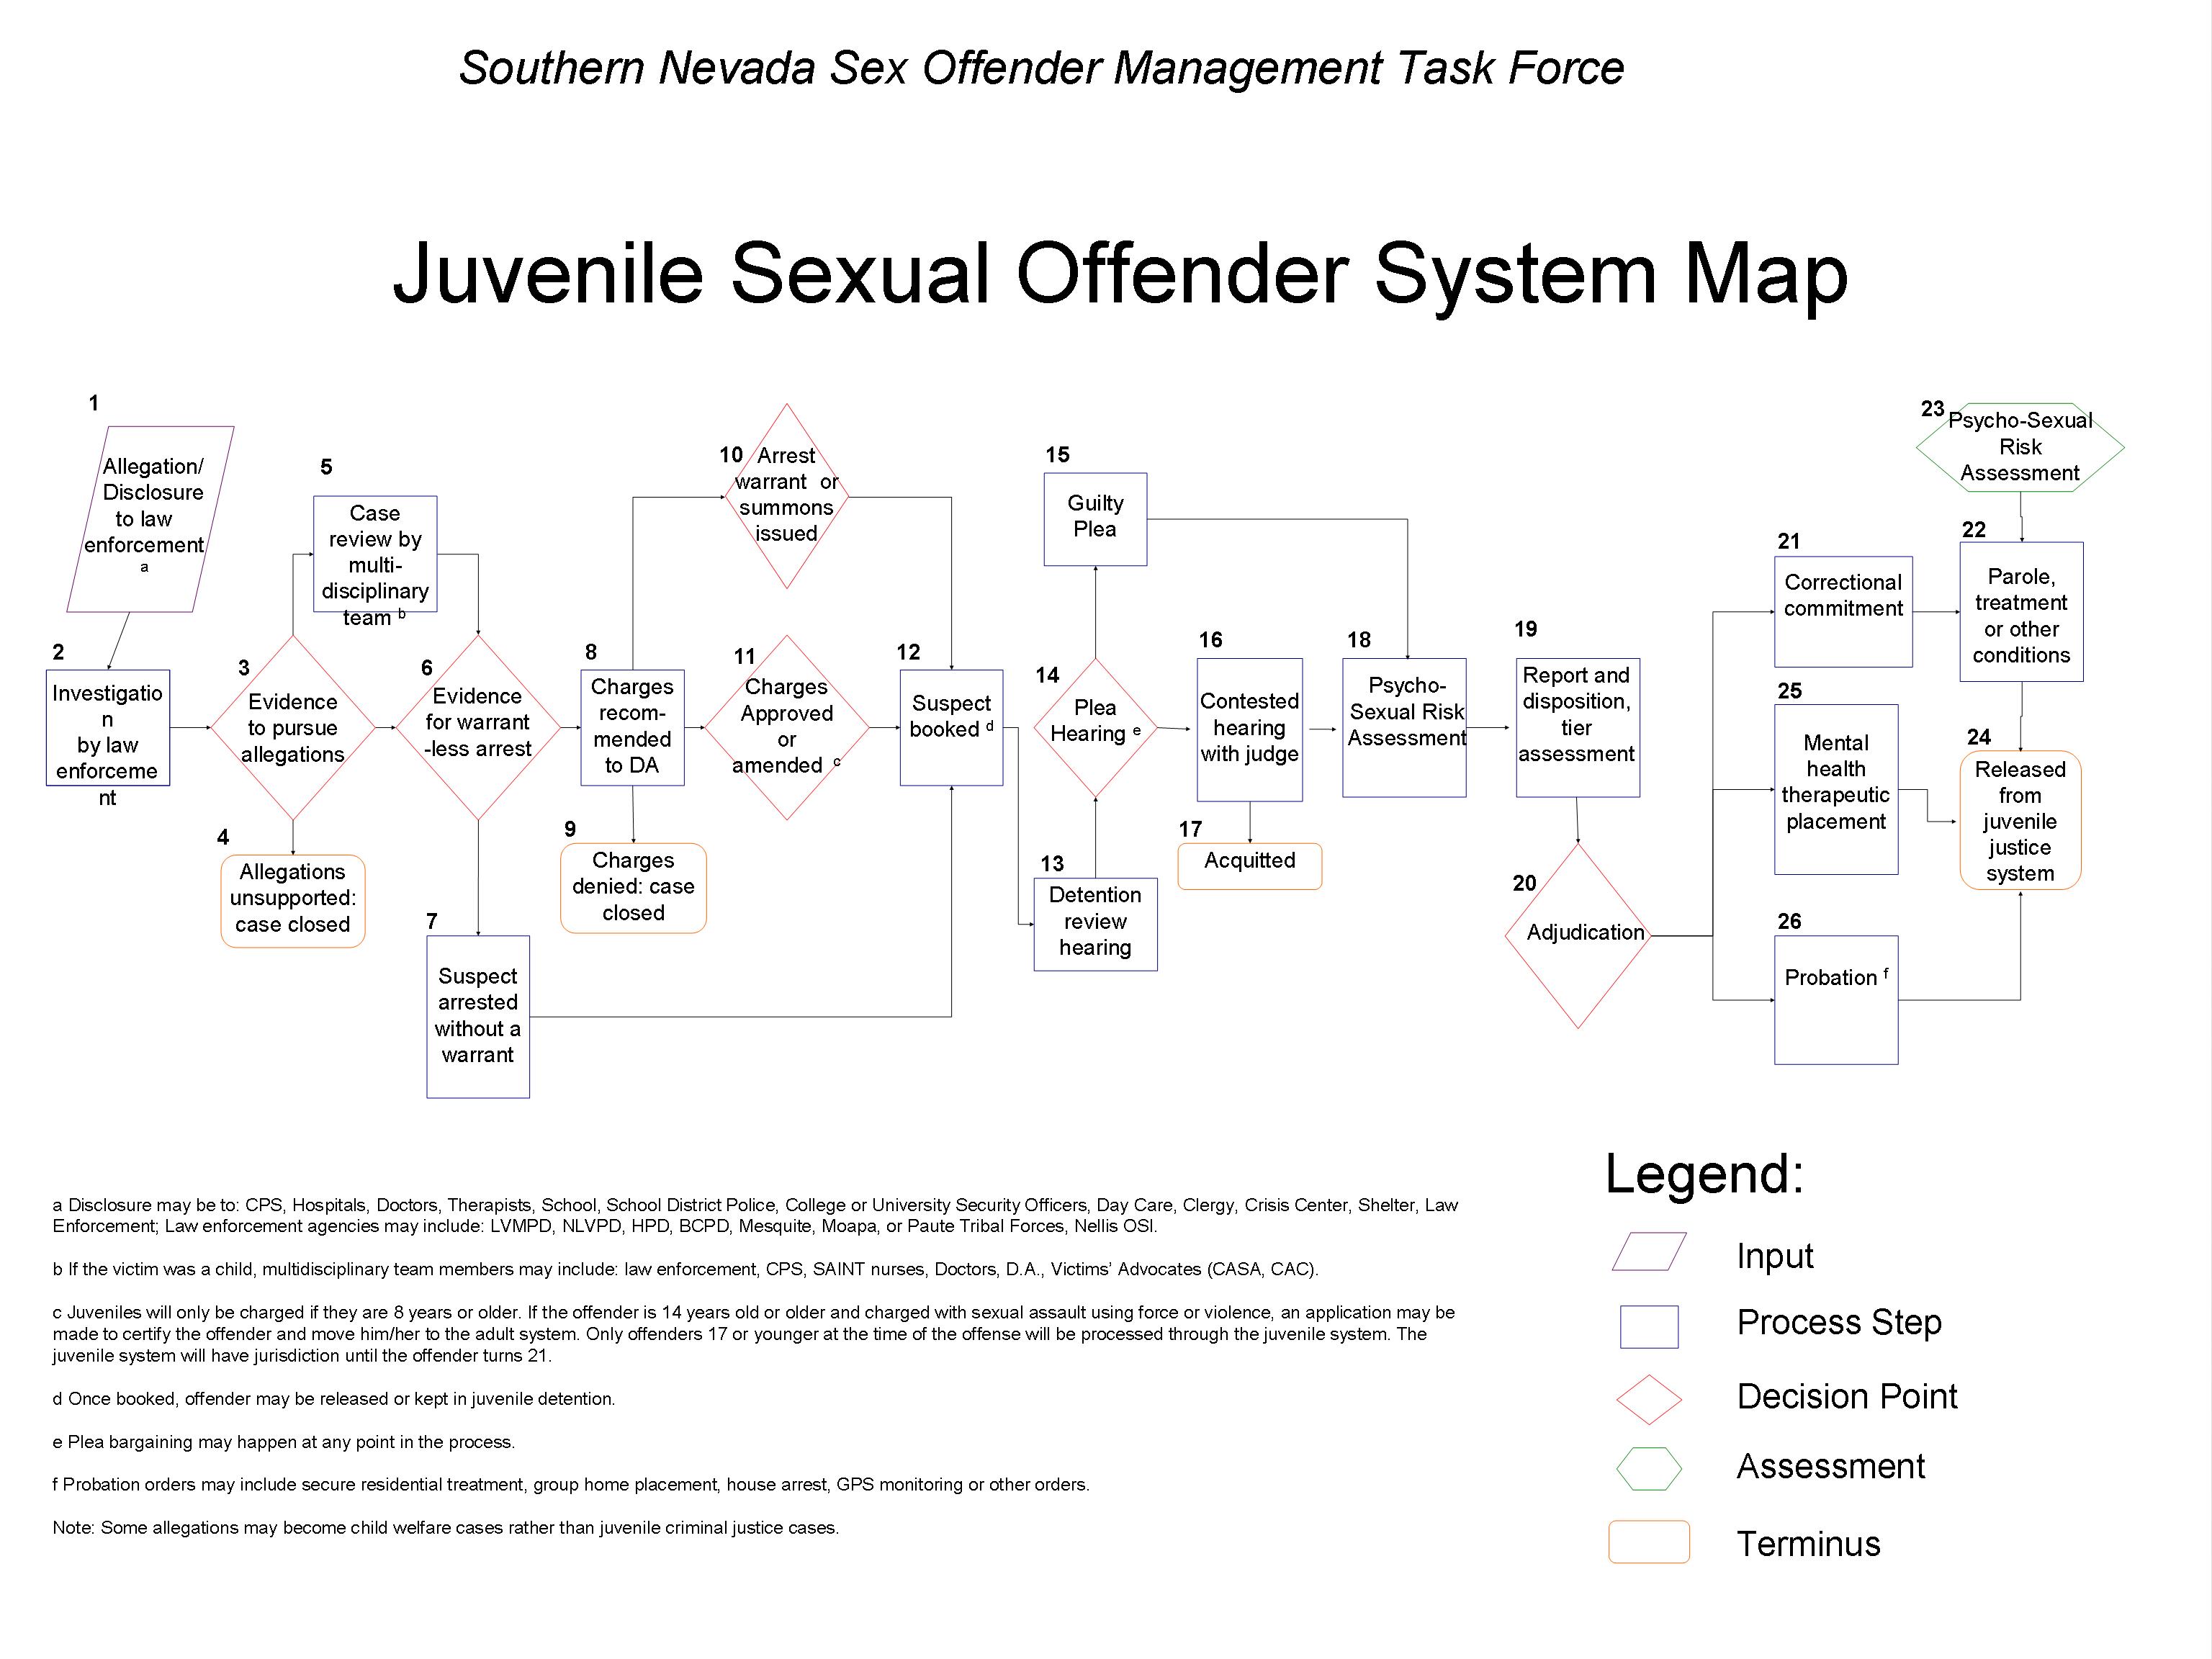 Juvenile Sexual Offender System Map